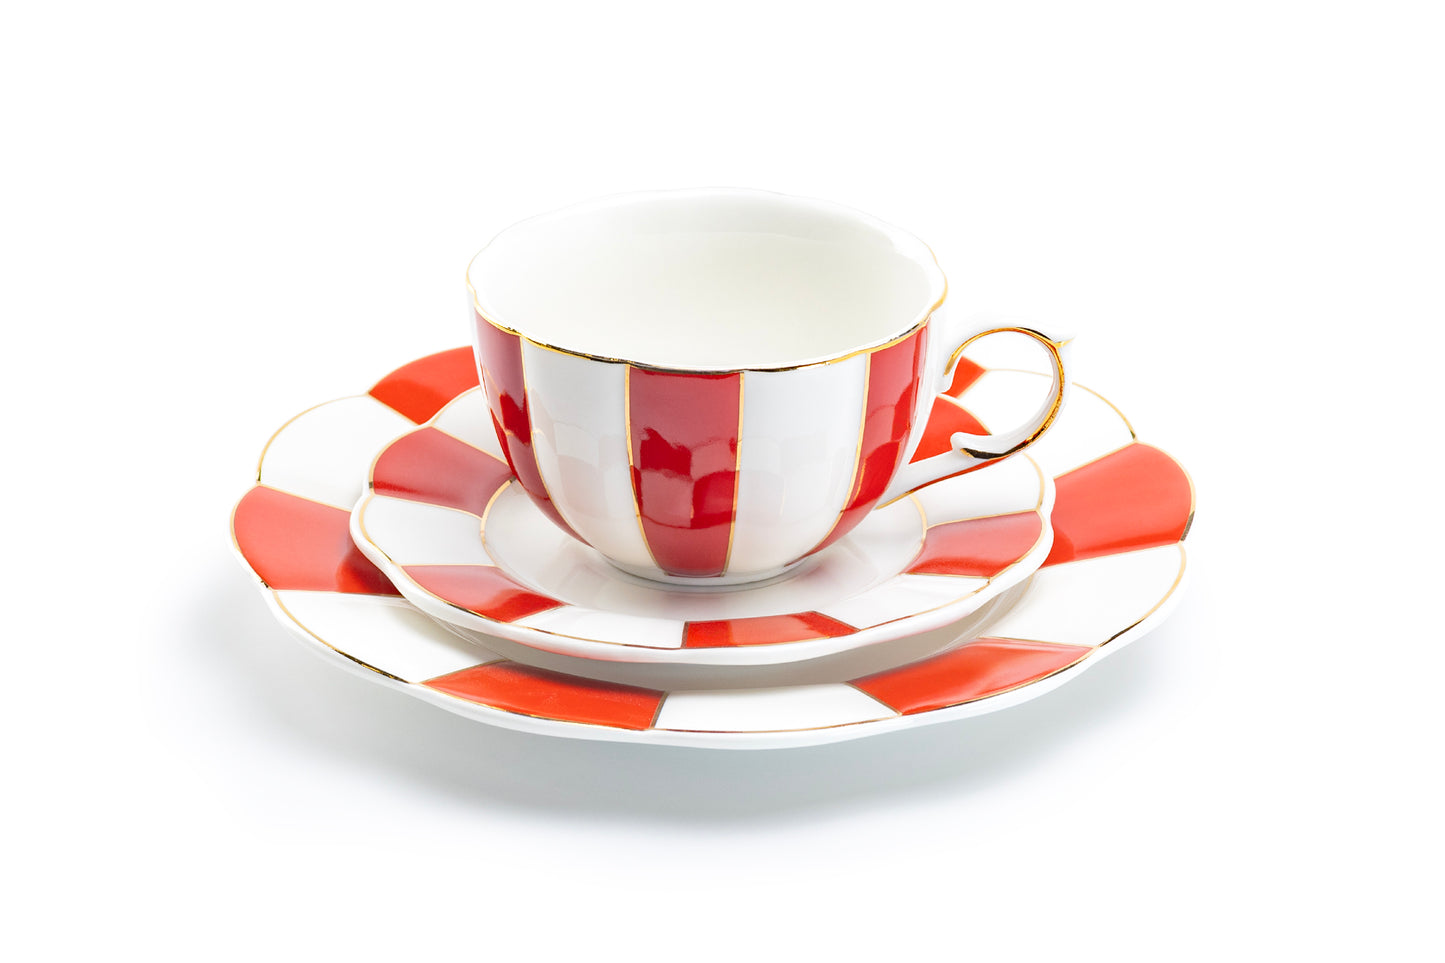 Red and White Scallop Fine Porcelain Tea Cup and Saucer